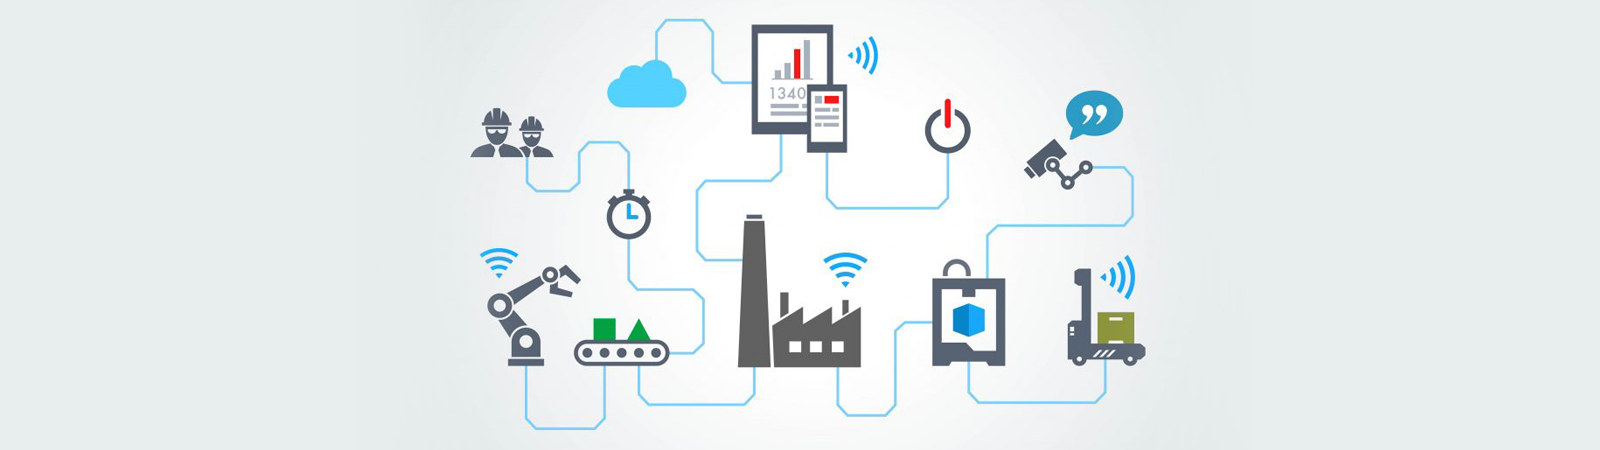 POTENTIAL OF THE INDUSTRIAL INTERNET OF THINGS (IIOT)